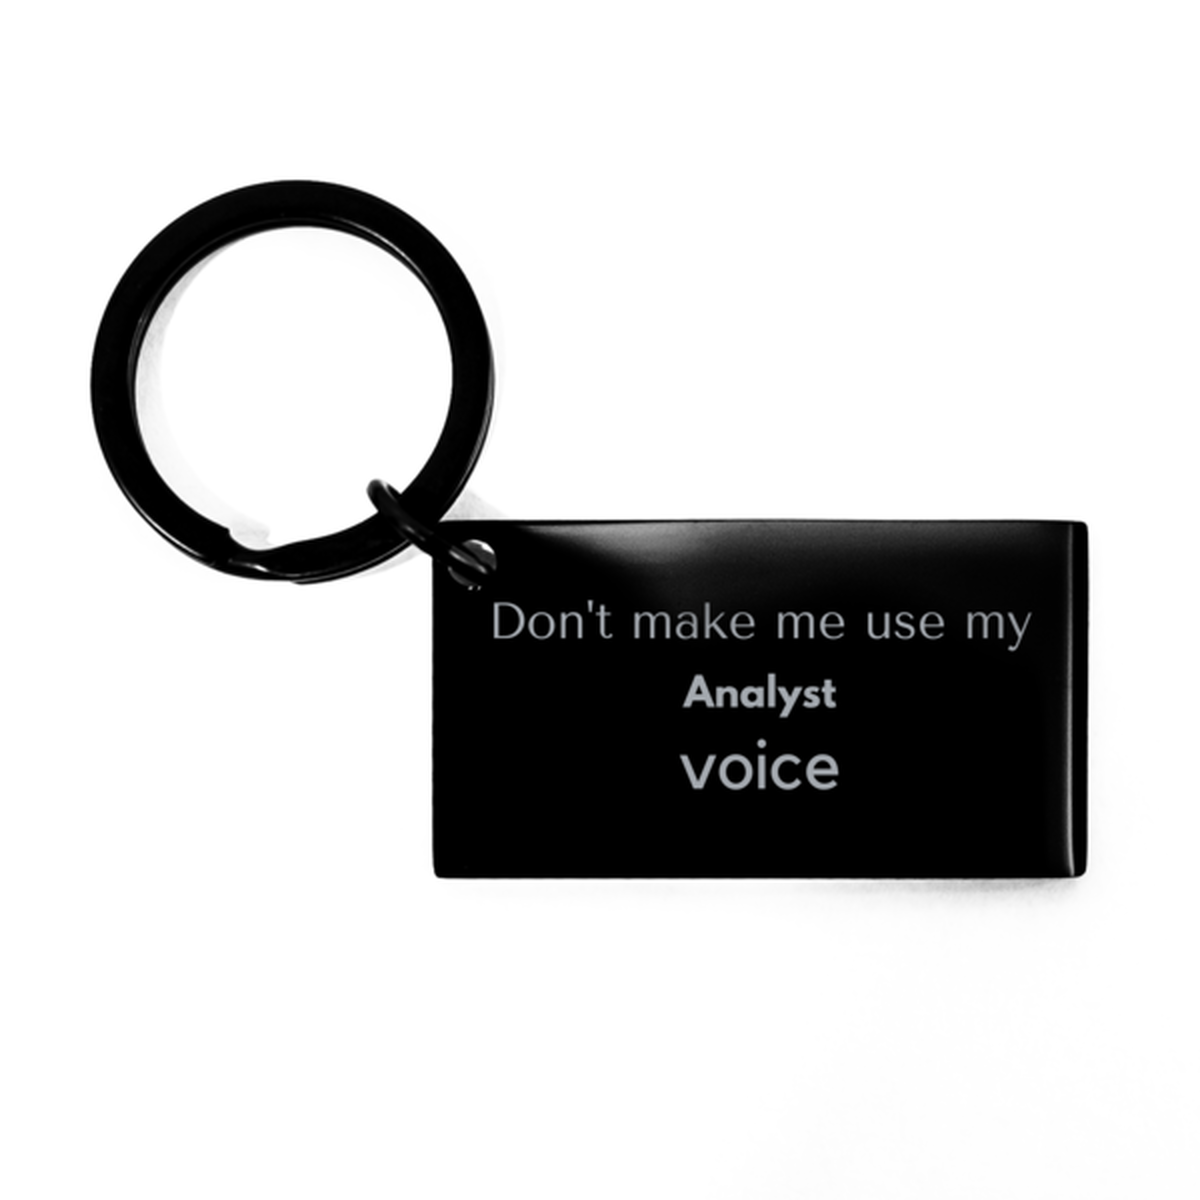 Don't make me use my Analyst voice, Sarcasm Analyst Gifts, Christmas Analyst Keychain Birthday Unique Gifts For Analyst Coworkers, Men, Women, Colleague, Friends